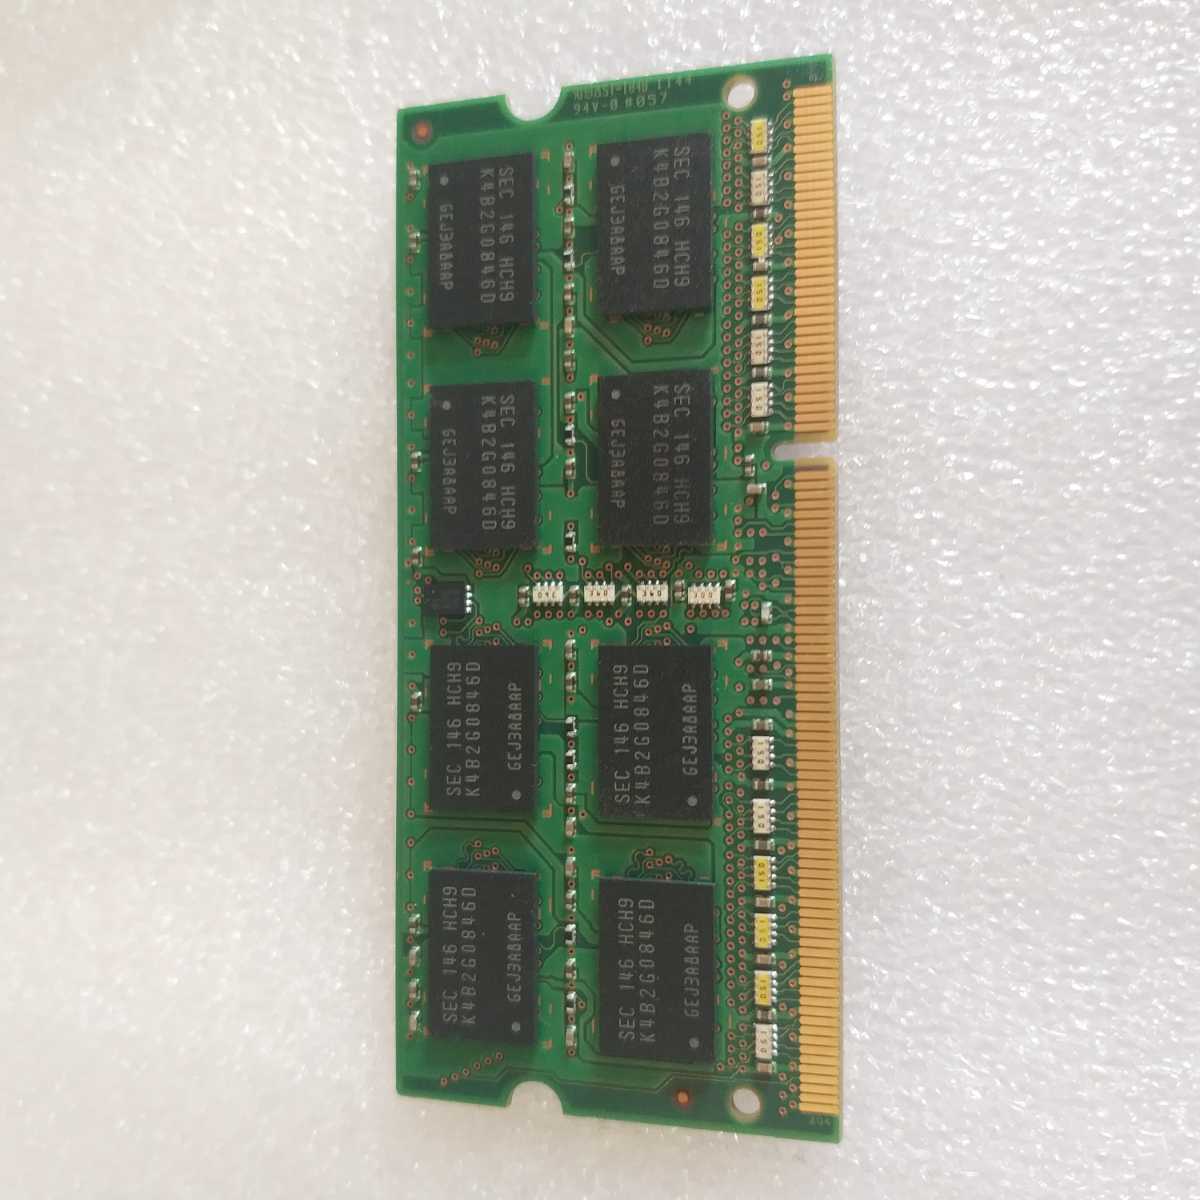  Gifu same day shipping charge 198 jpy ~ Samsung DDR3 memory PC3-10600S-09-11-F3 M471B5273DH0-CH9 4GB 1 sheets notebook for several possible * has confirmed tube R303